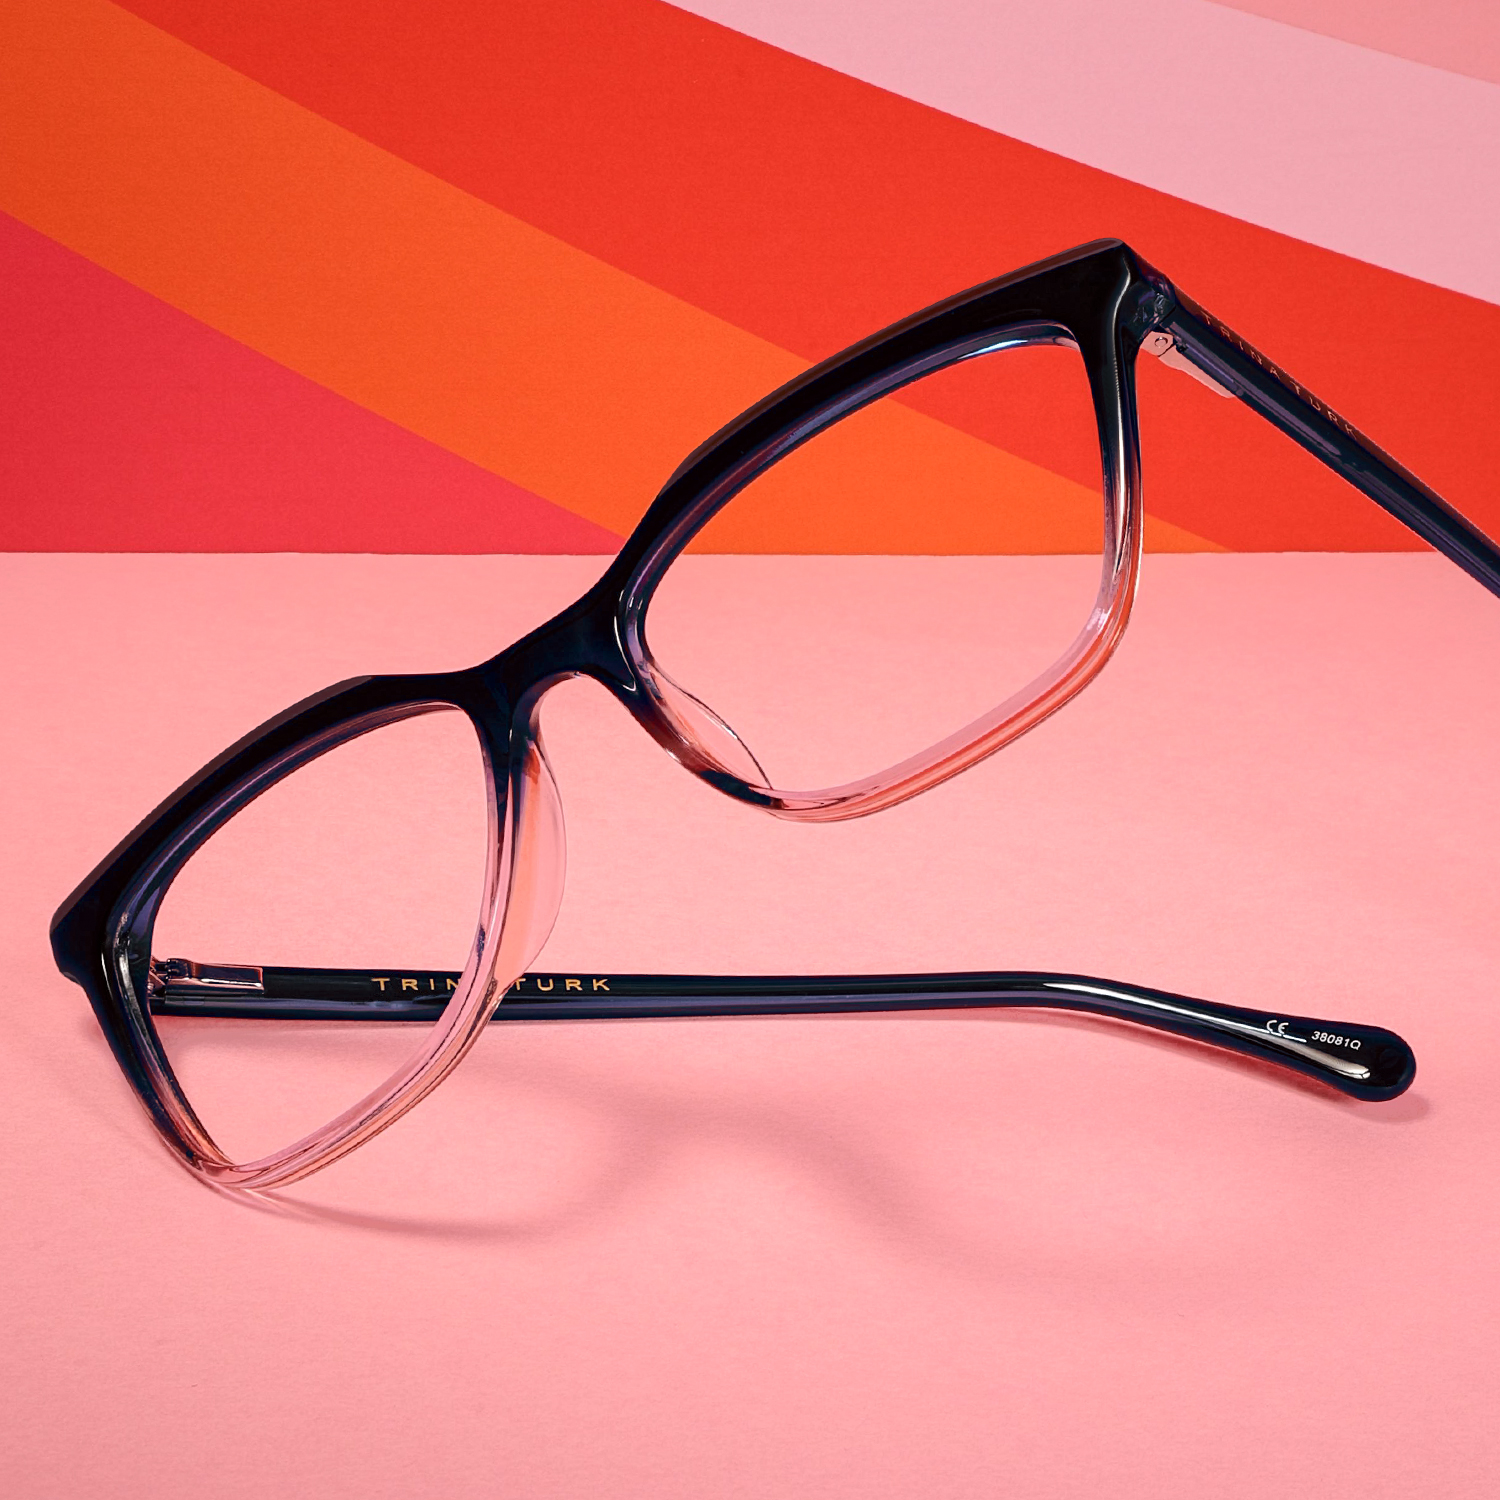 Trina Turk Eyewear - Retro-inspired shapes and jewelry-inspired hand-enameled décor